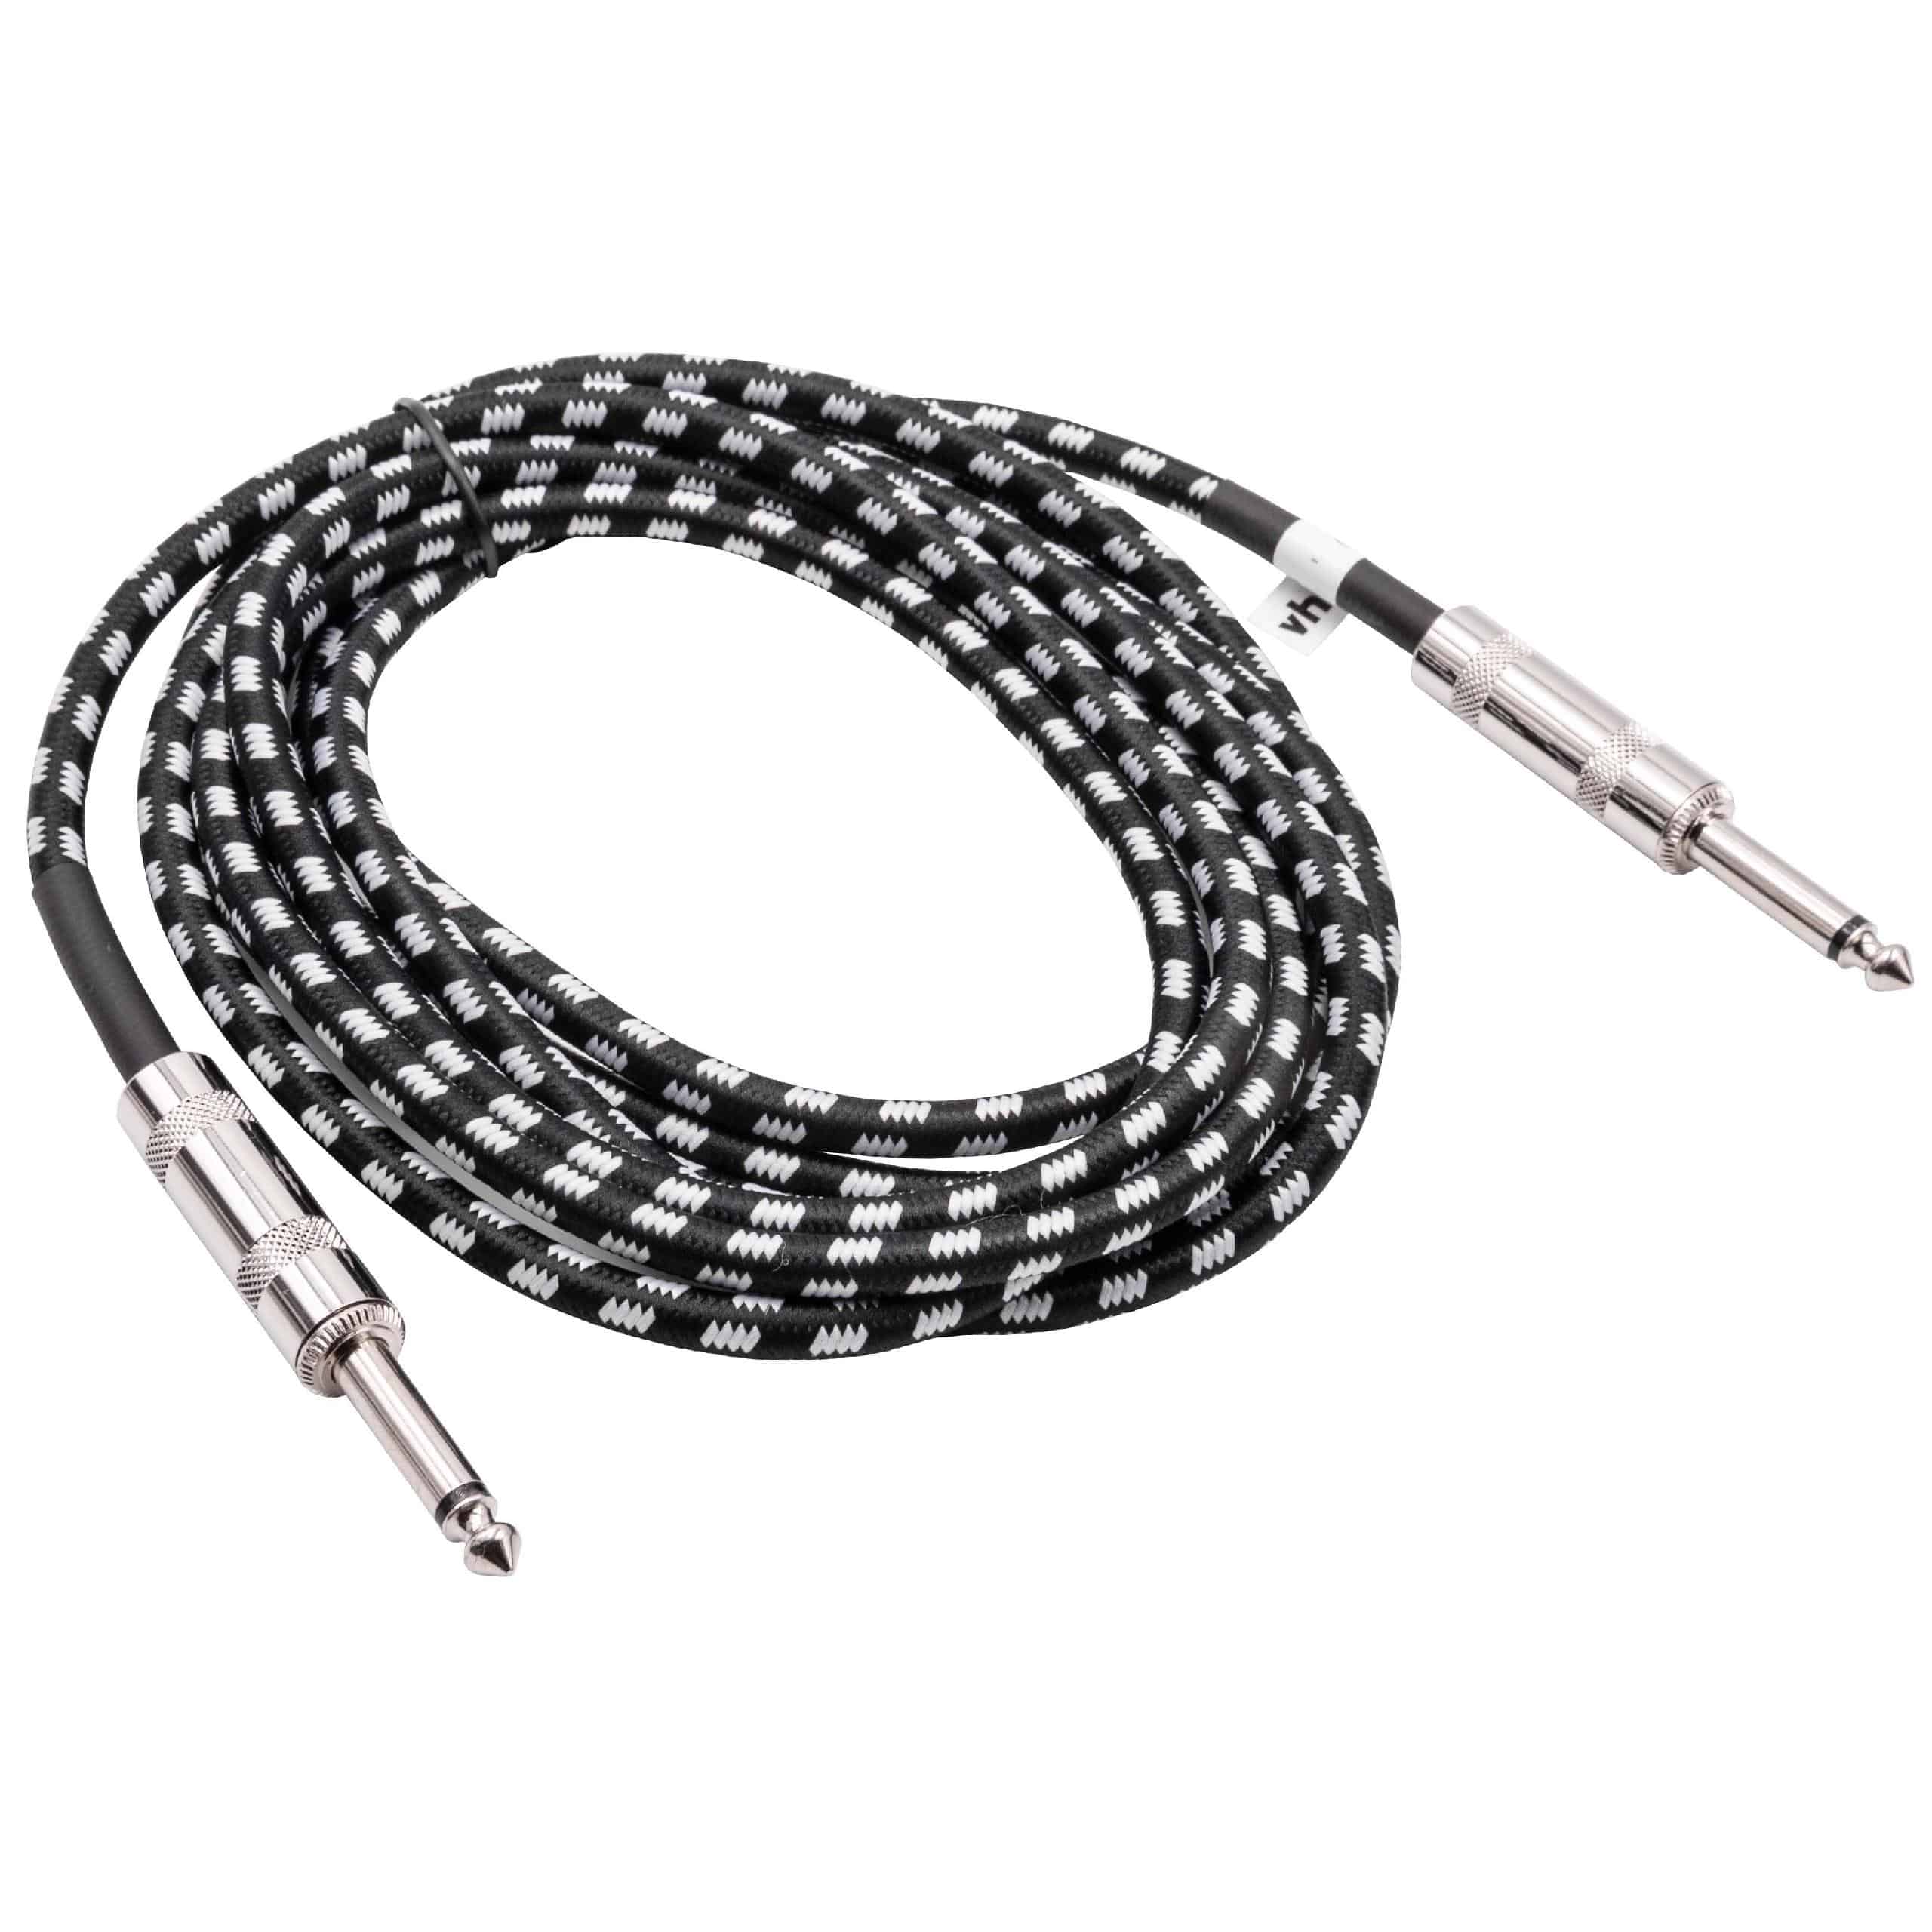 3m Guitar AUX Cable for Electric Guitar compatible with all 6.35mm Audio-Ports - Braided, Straight